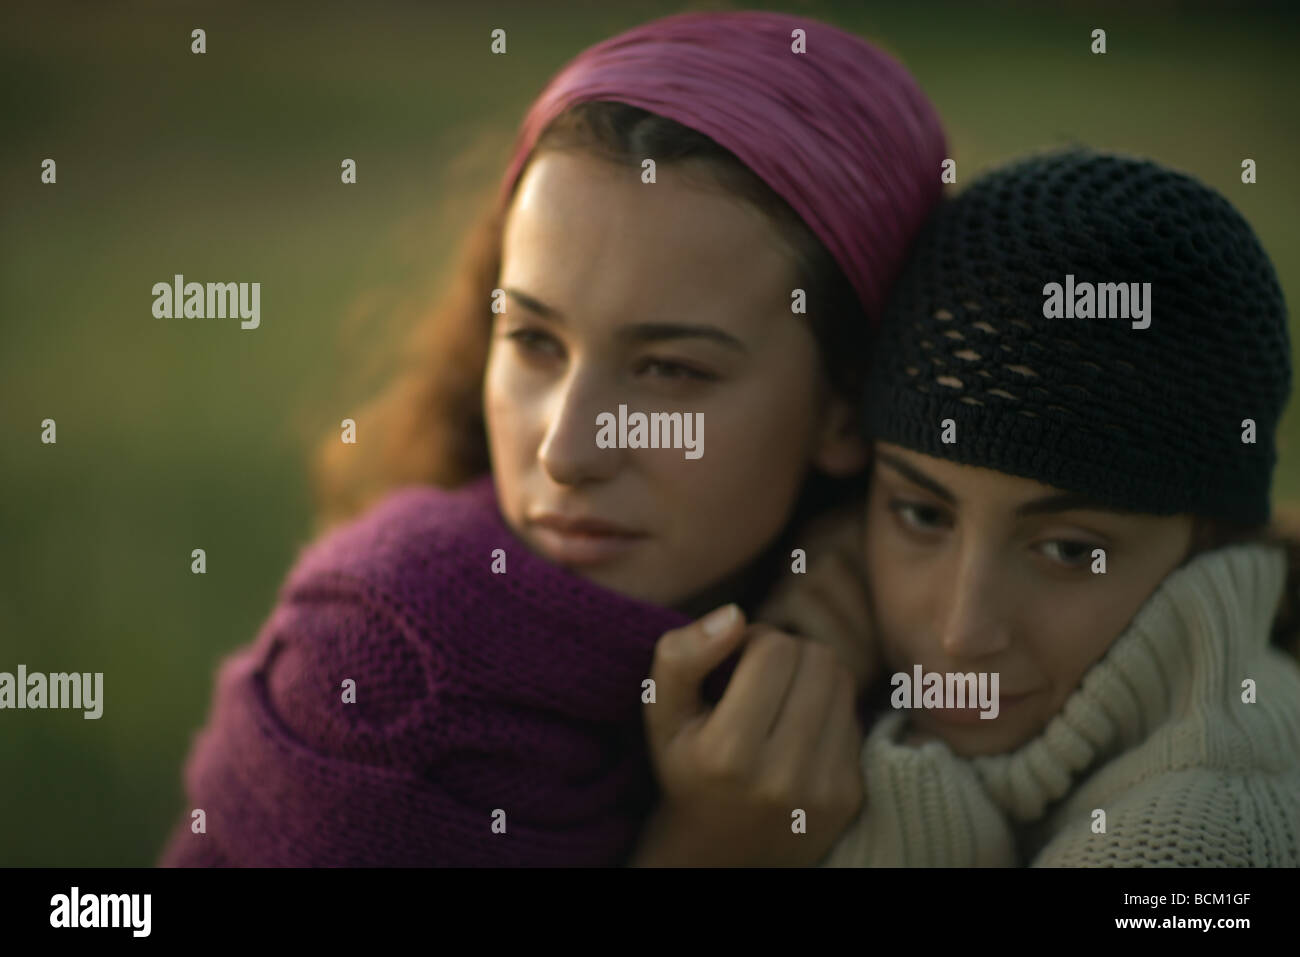 Two women huddling together, pulling sweaters up to faces, looking away, close-up Stock Photo